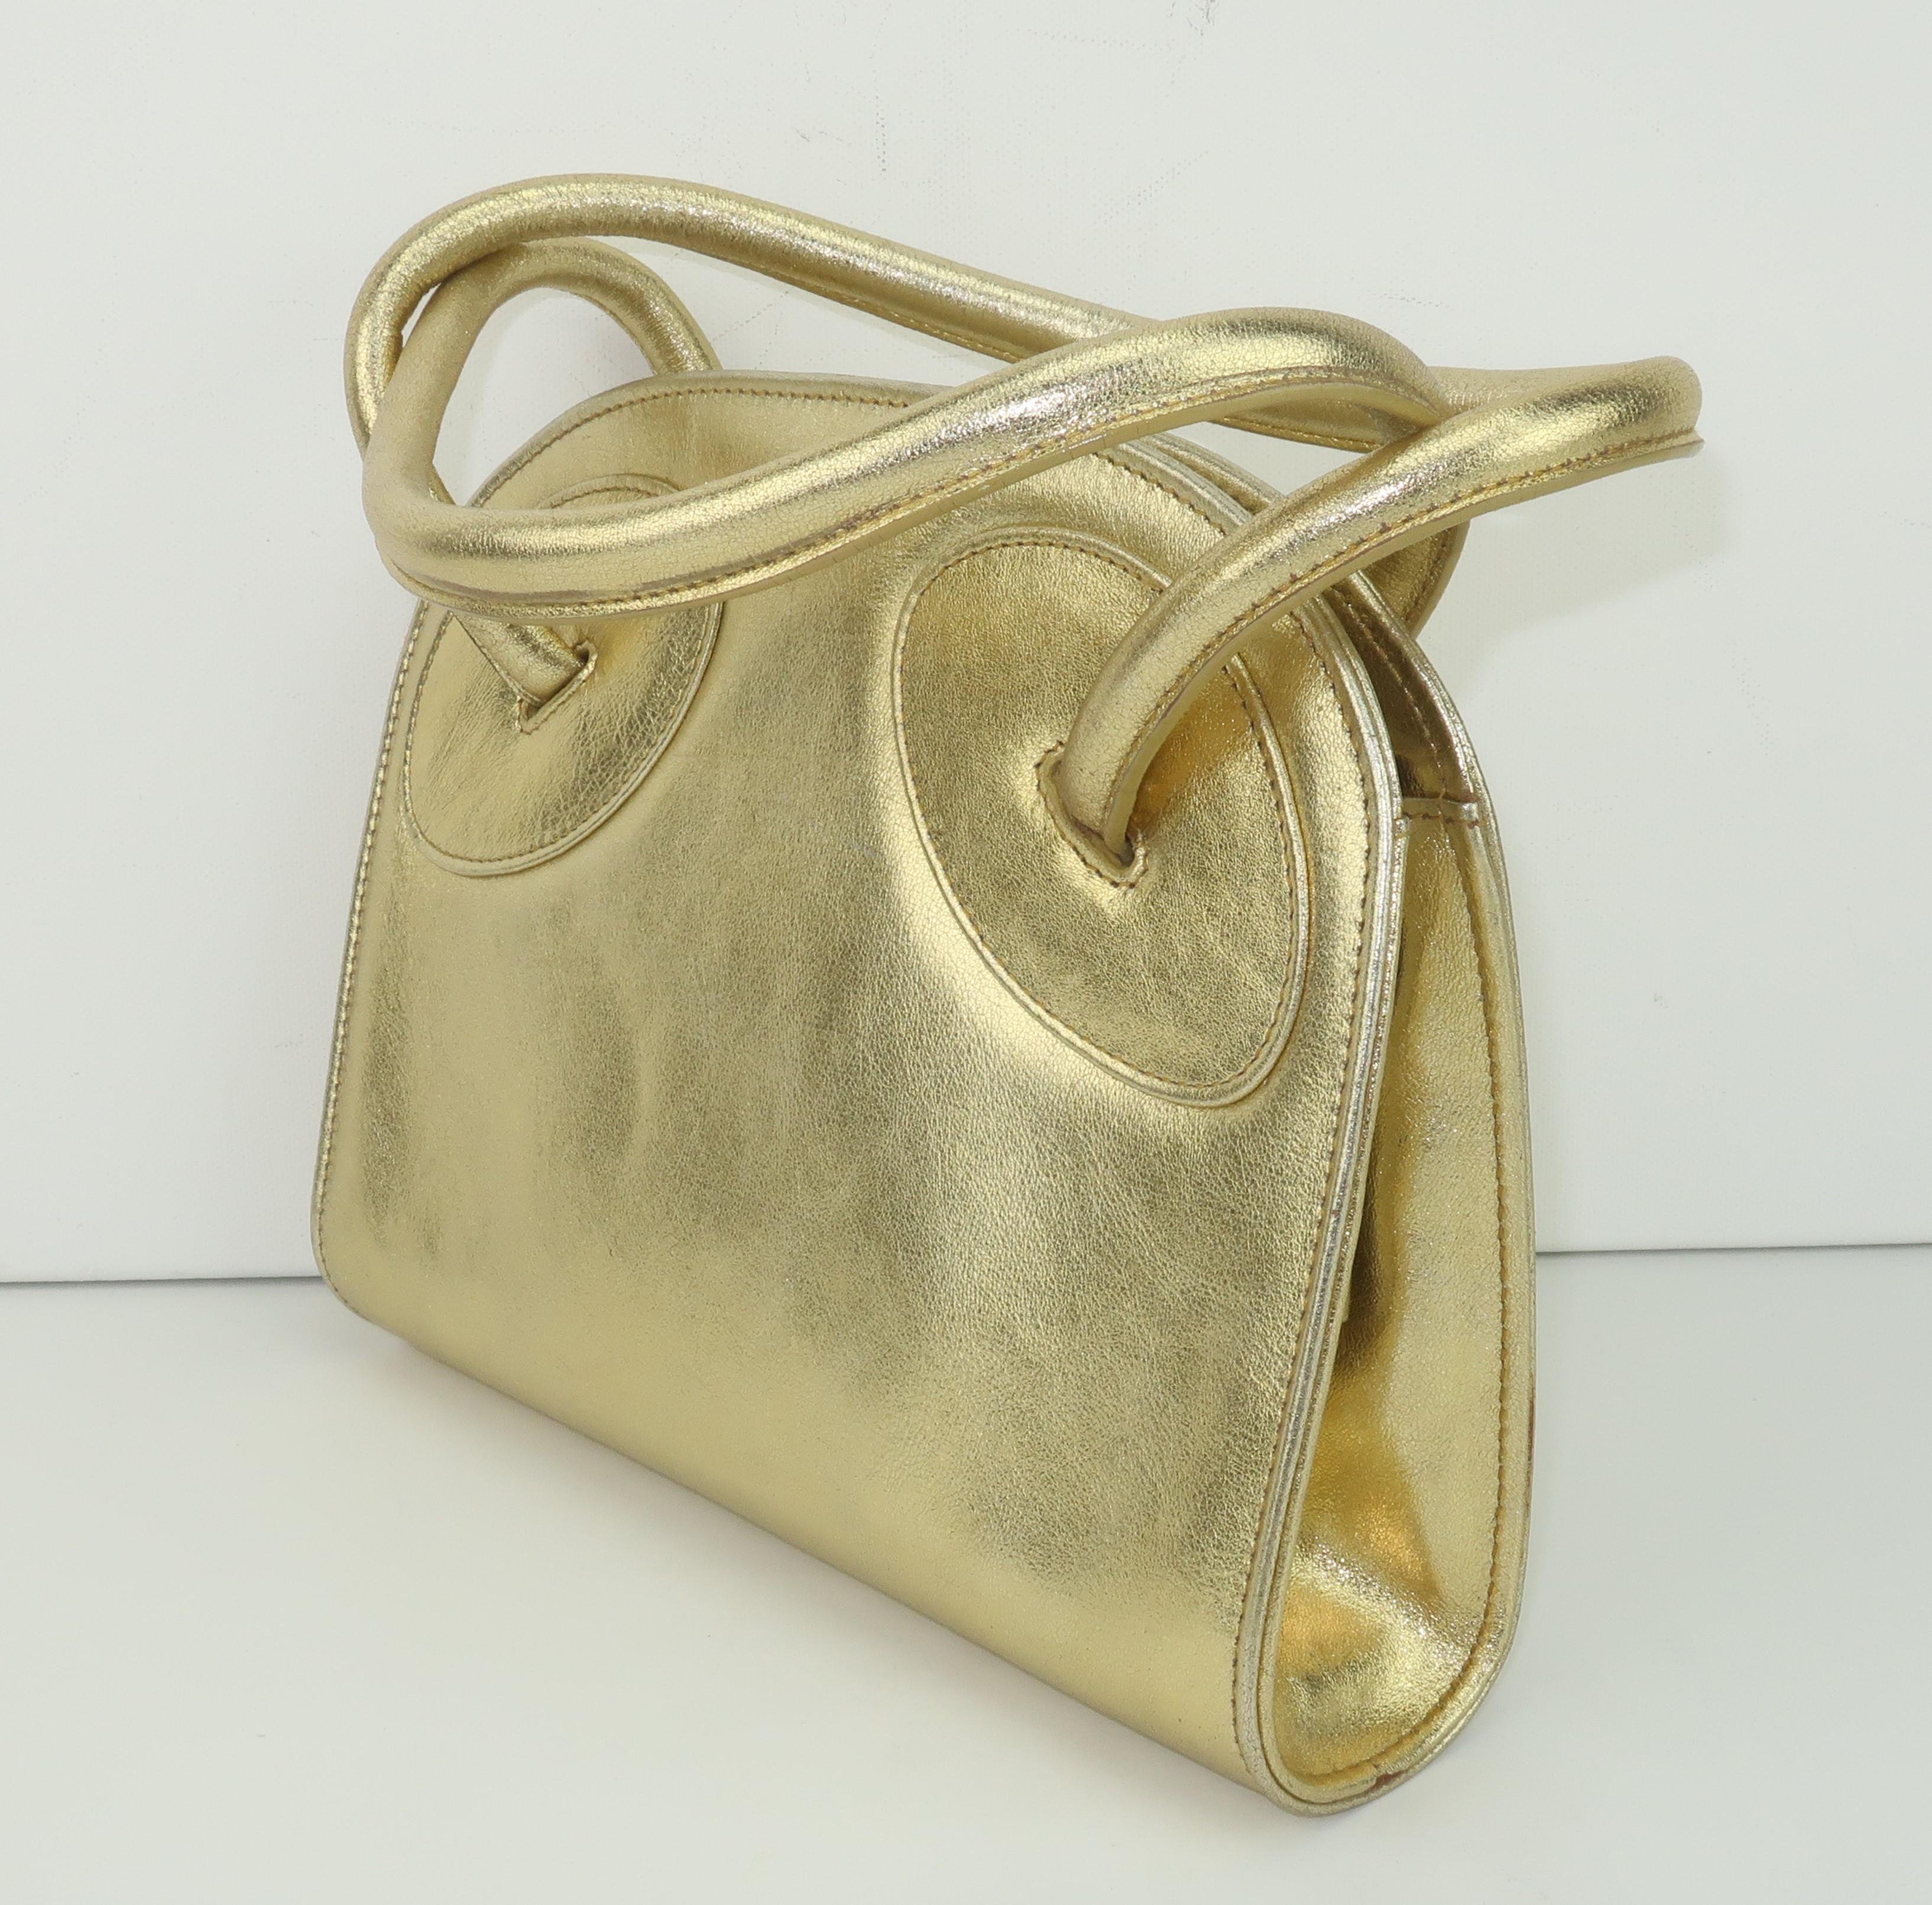 Laura Biagiotti Attributed Gold Leather Handbag, 1970's For Sale 3